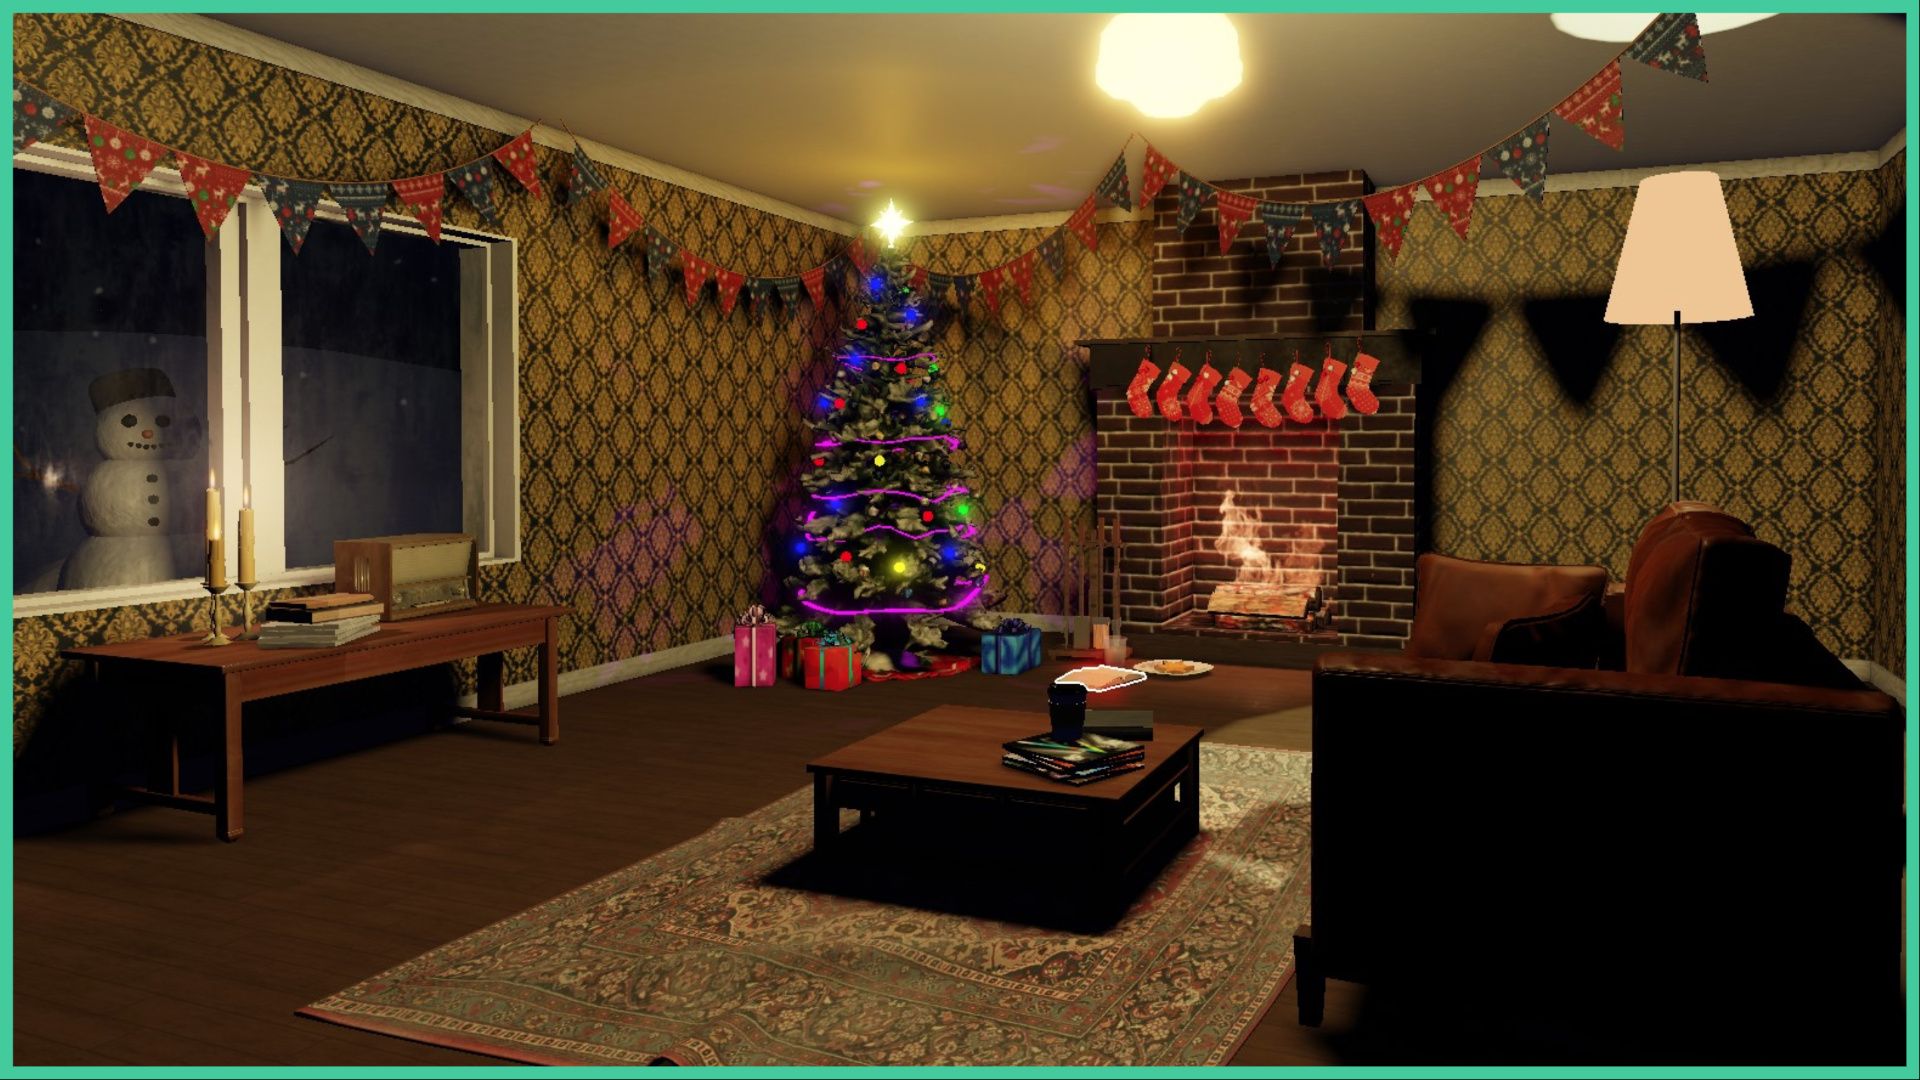 feature image for our short creepy stories krampus, the image is a screenshot from the living room in the game, decked out with christmas decorations, including bunting and a glowing christmas tree with lights, baubles, a star on the top, and gifts underneath the tree, there is a glowing fireplace with festive stocking hung up, as well as a sofa, a coffee table, and a desk that has lit candles, books, and an old style radio on top, there is a large window that shows that it is snowing outside, with a snowman staring through the window